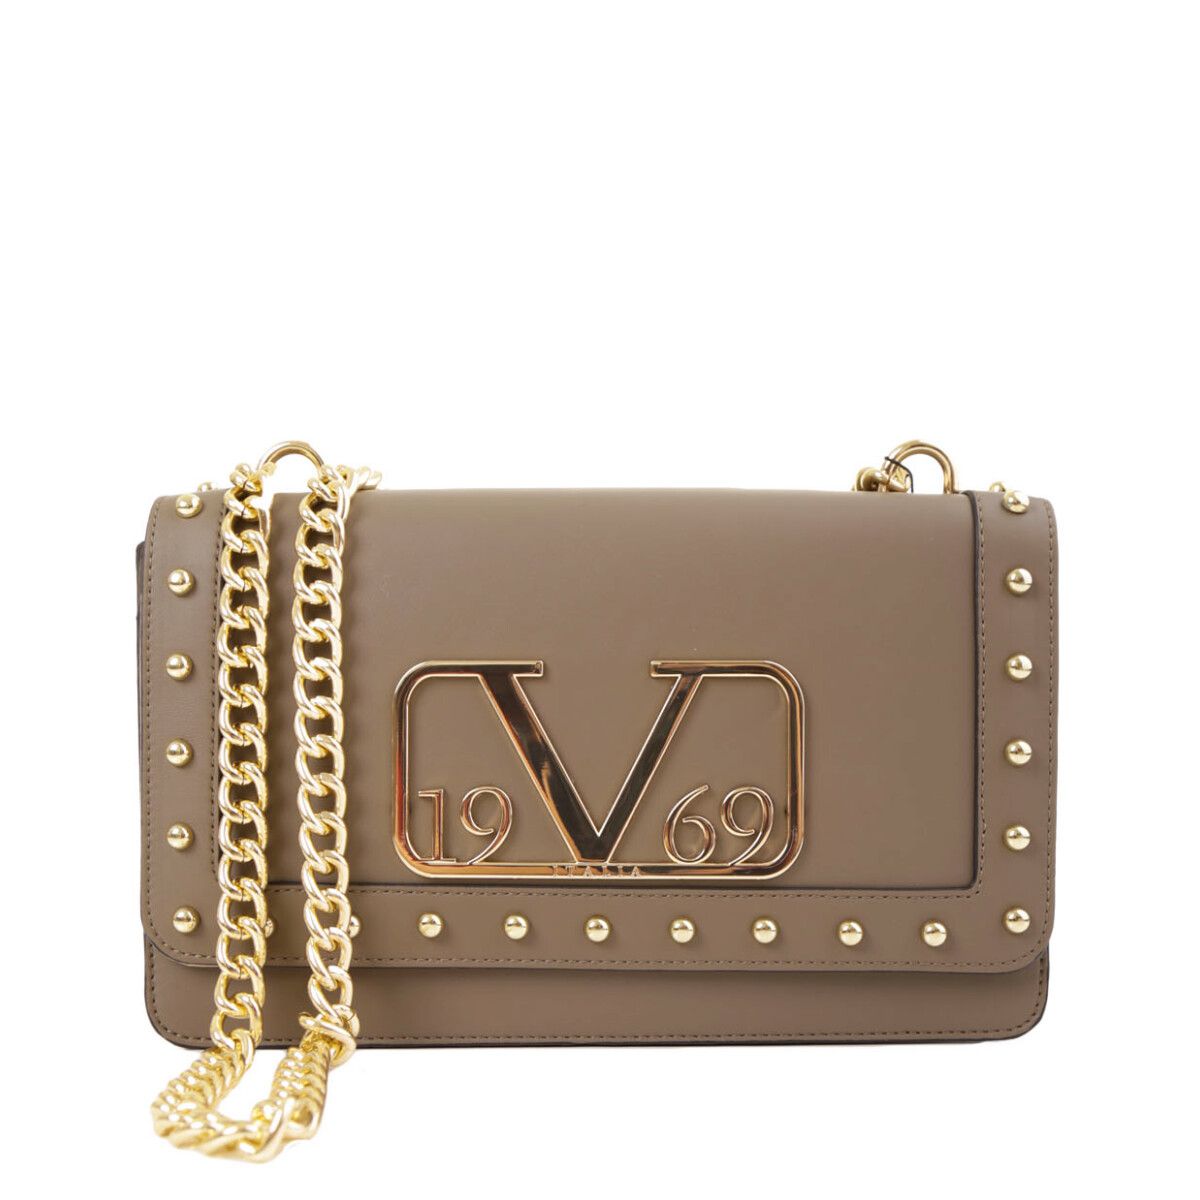 Brand: 19v69 Italia Gender: Women Type: Bags Season: Fall/Winter PRODUCT DETAIL • Color: brown • Fastening: with automatic buttons • Pockets: inside pockets • Size (cm): 16x27x8 • Details: -shoulder bags • Article code: VI20AI0040 COMPOSITION AND MATERIAL • Composition: -100% leather. material:woven. type:clutch. occasion:everyday. gender:womens. pattern:embellished